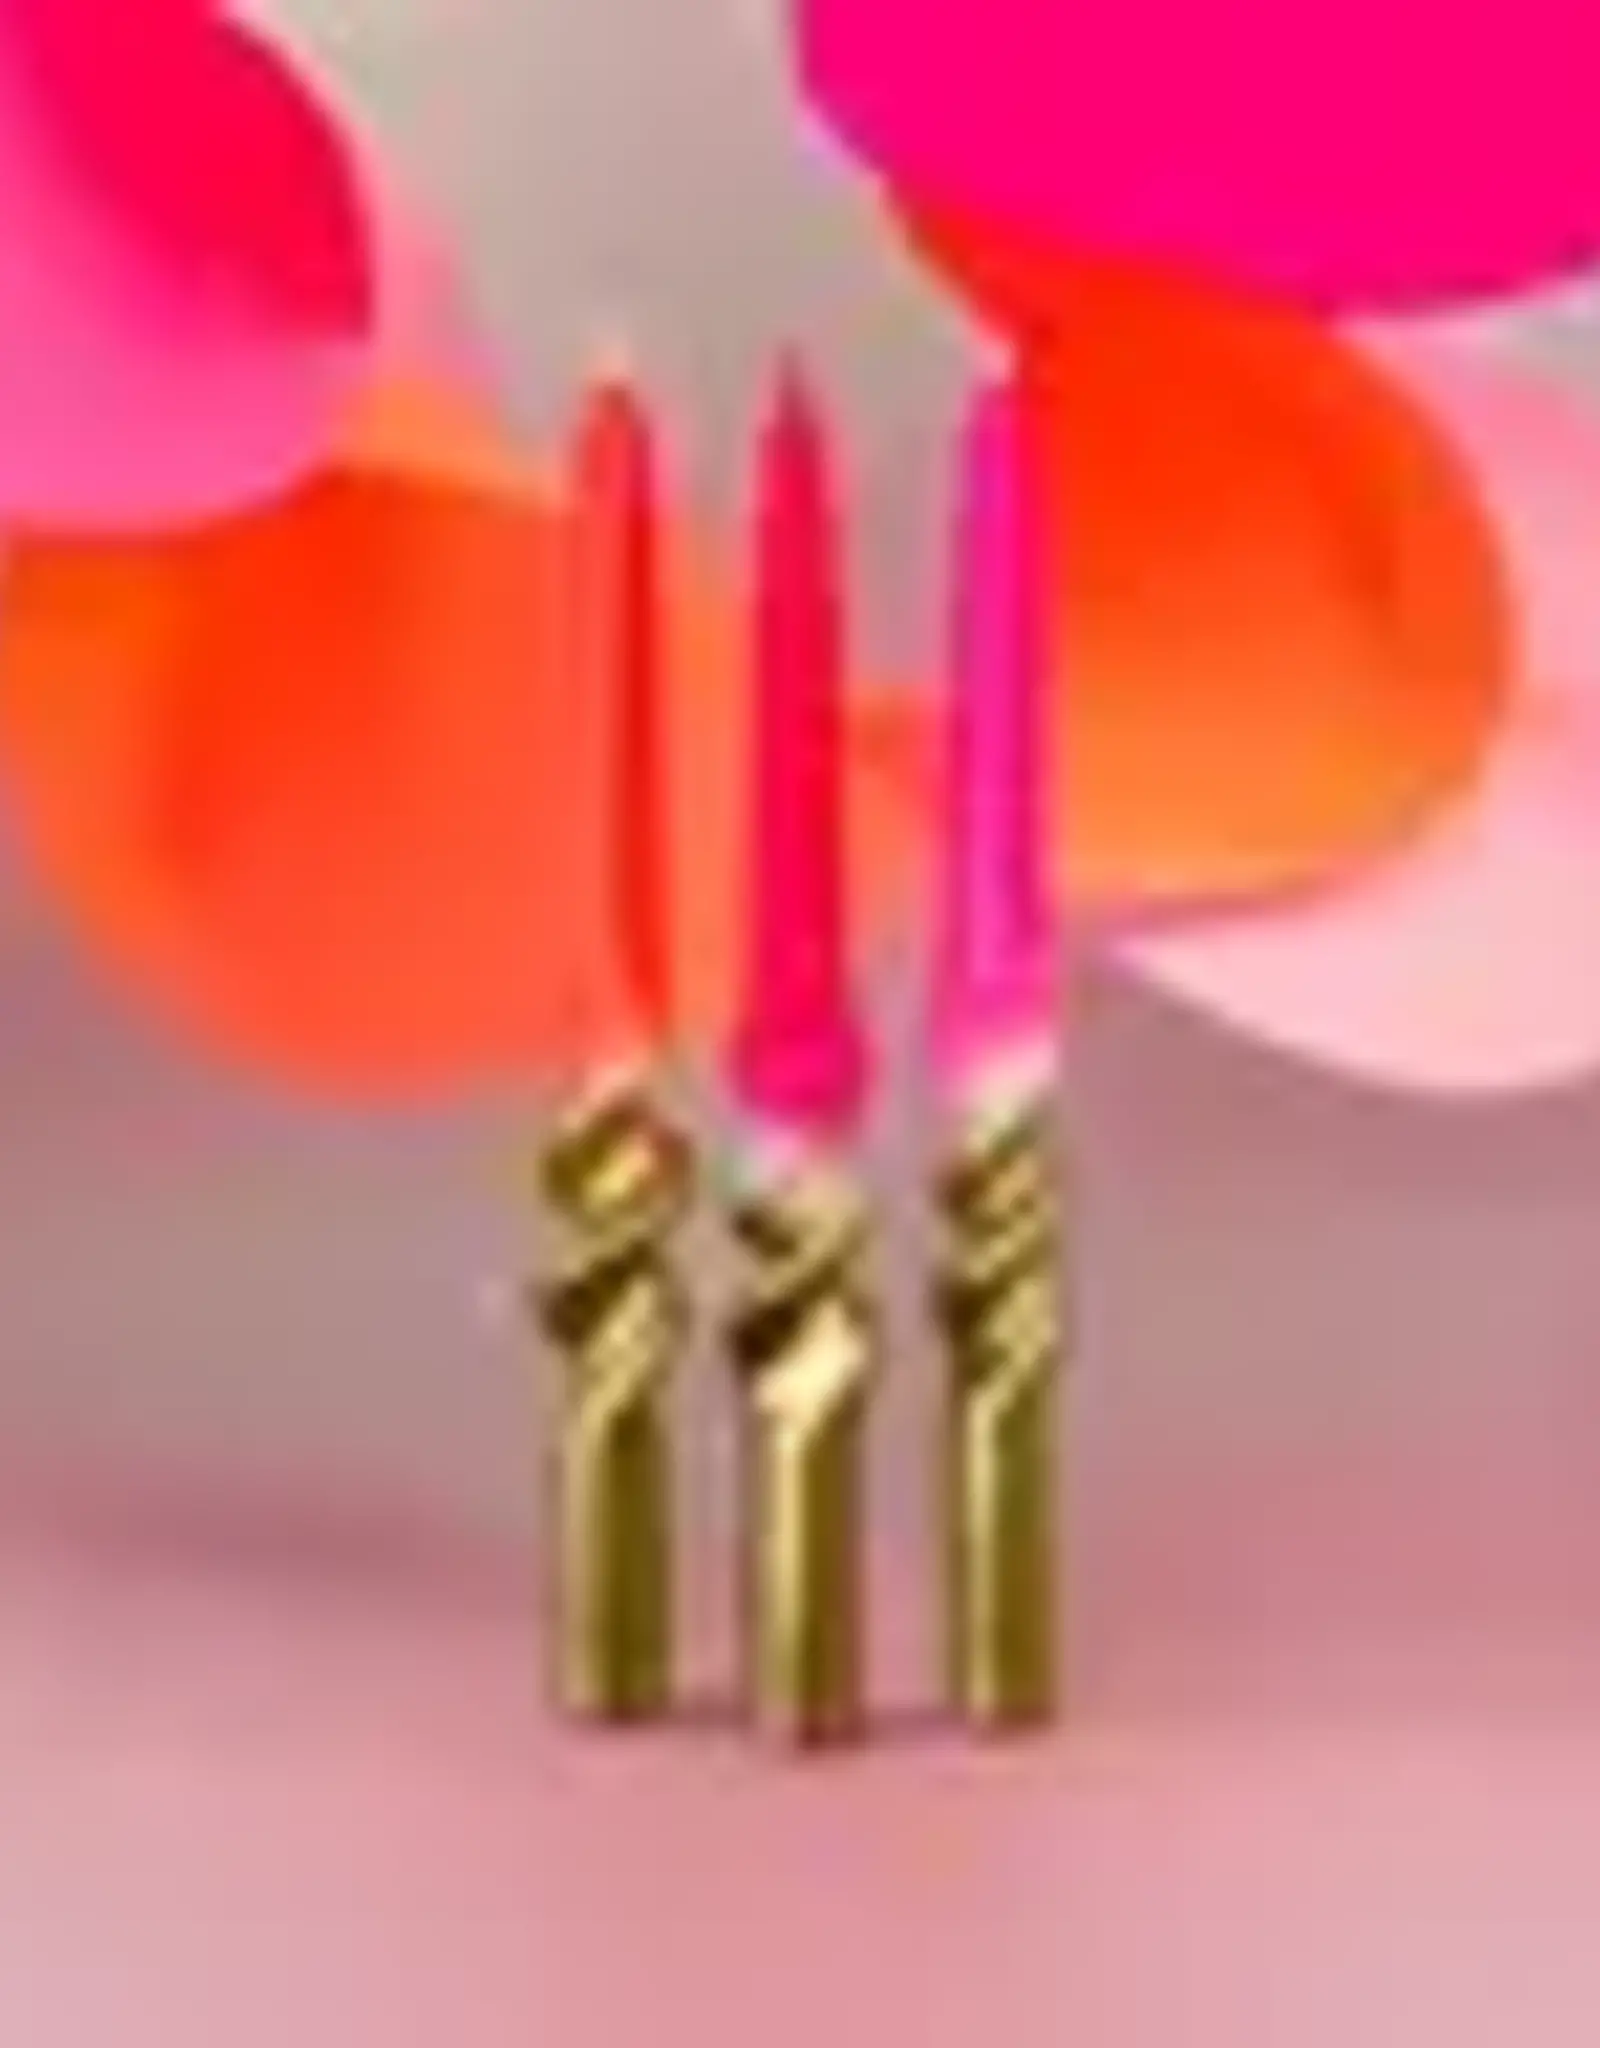 Pink Stories Tapered Candles - Dip Dye Swirl: Golden Hour